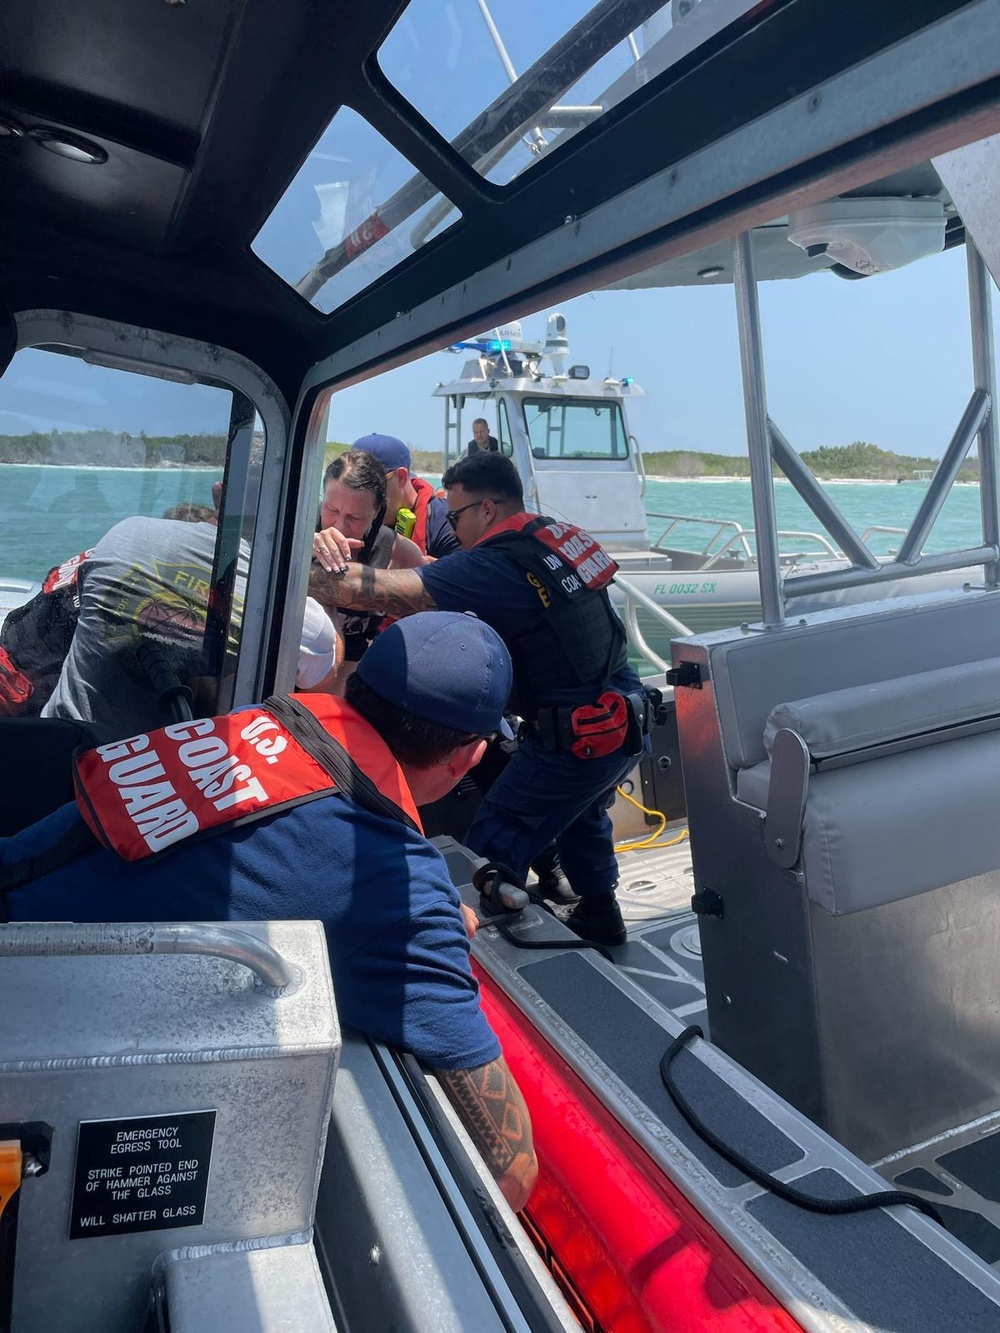 Coast Guard rescues 5 boaters in under 3 hours near Tampa Bay